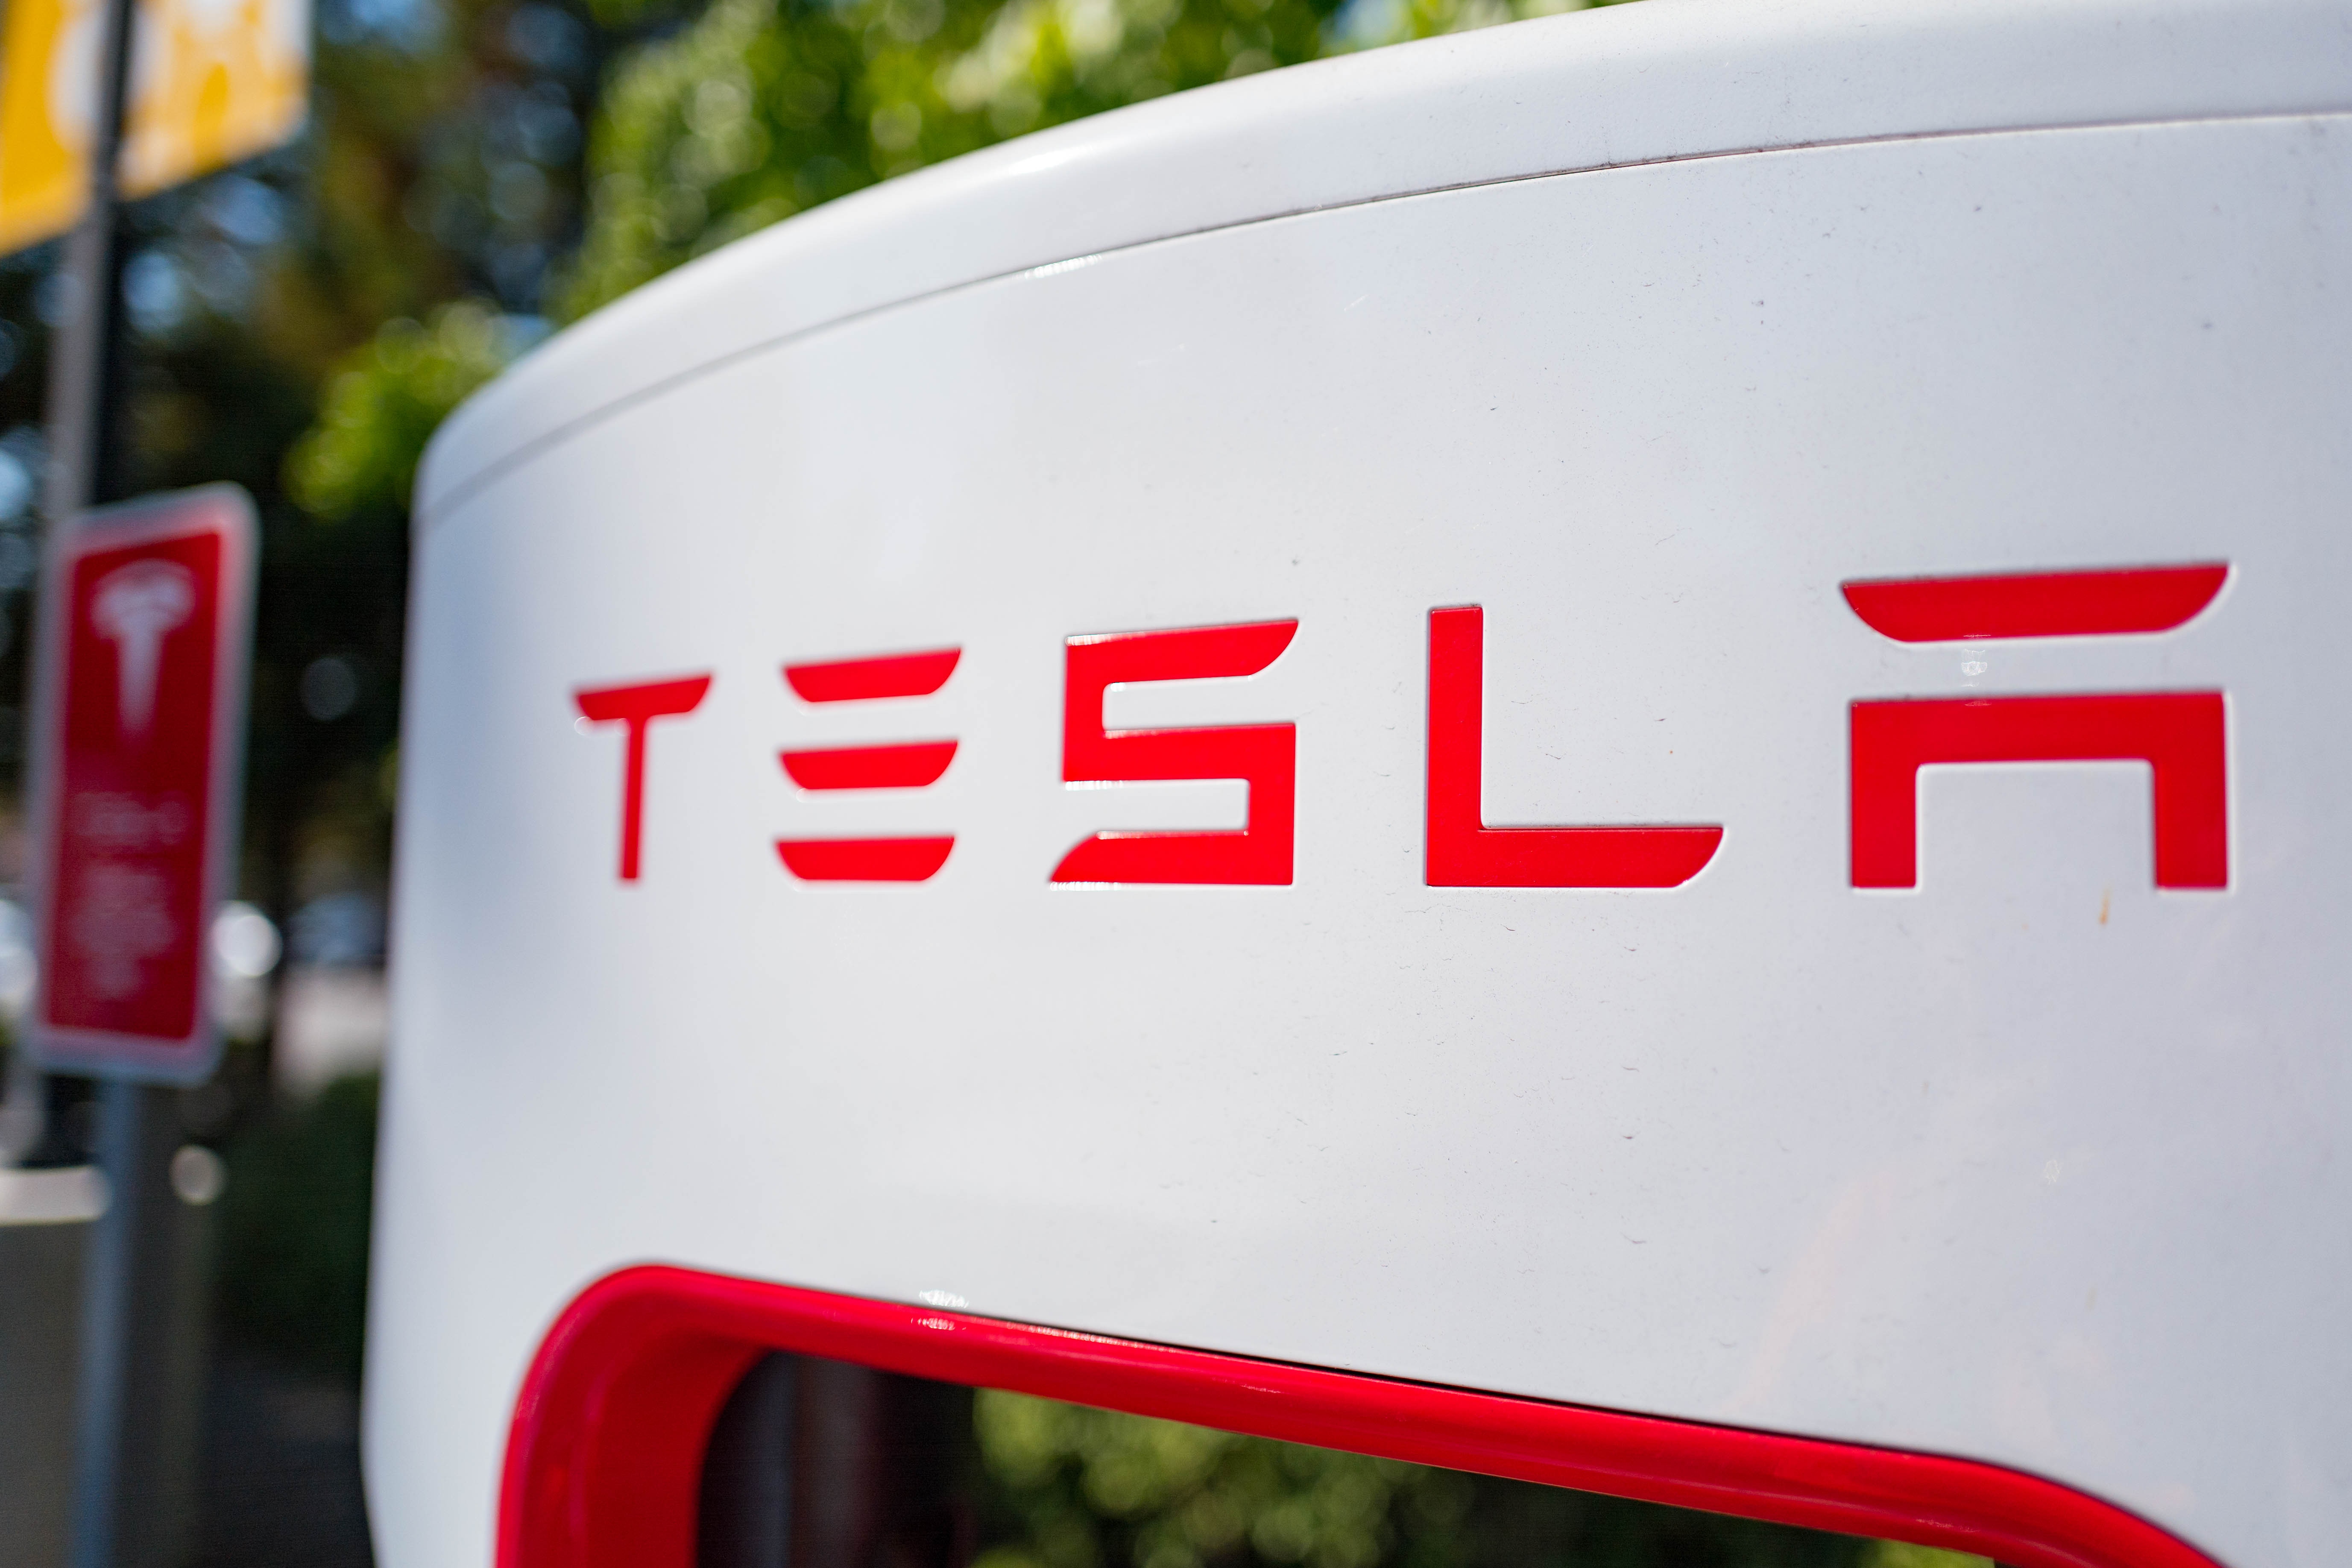 Tesla Shares Could Drop to $10, Says Morgan Stanley